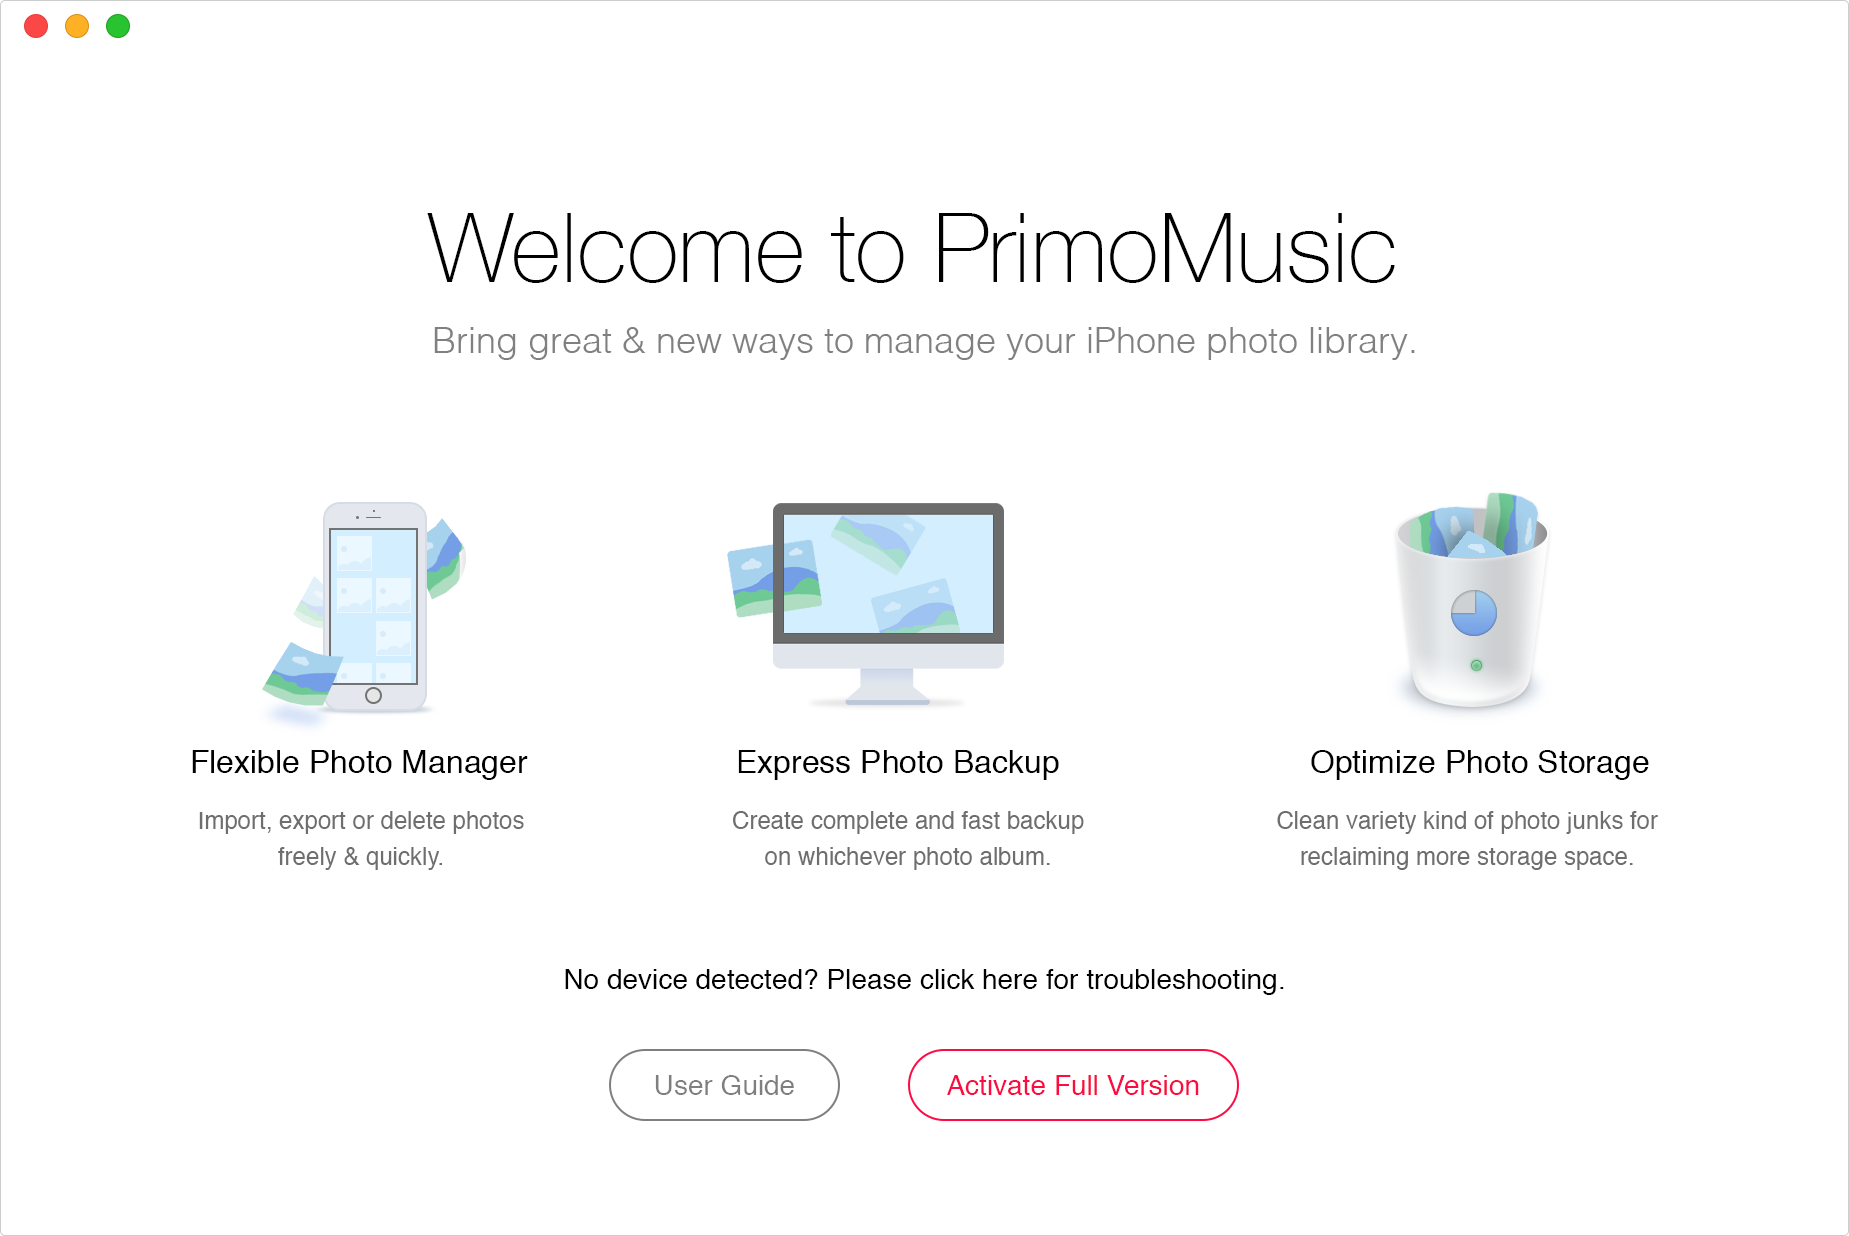 Open Open PrimoMusic and connect your iPhone to computer